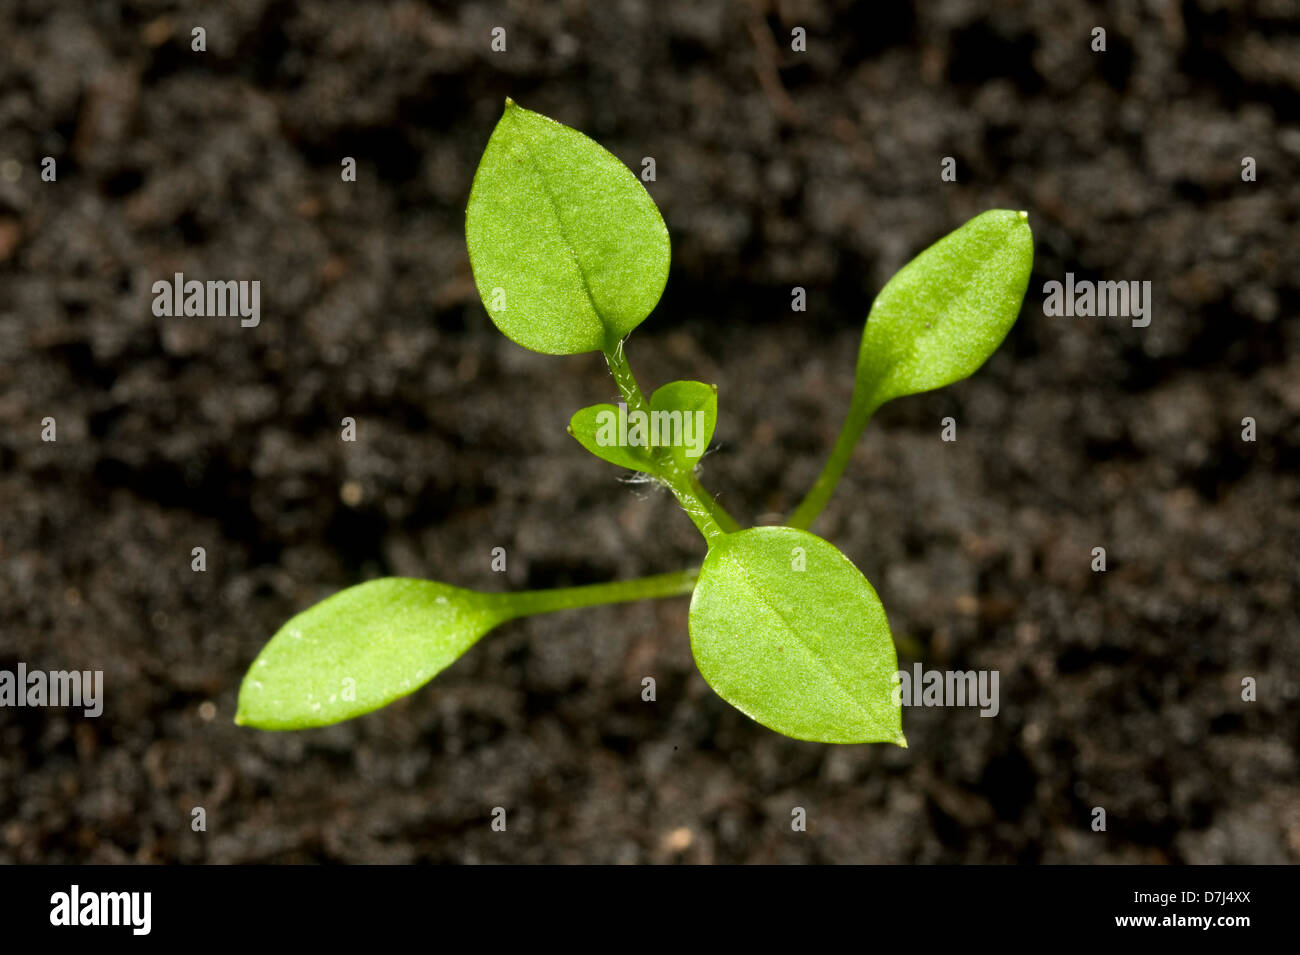 Seedling cotyledons and first true leaves forming of chickweed, Stellaria media, an annual agricultural and garden weed Stock Photo